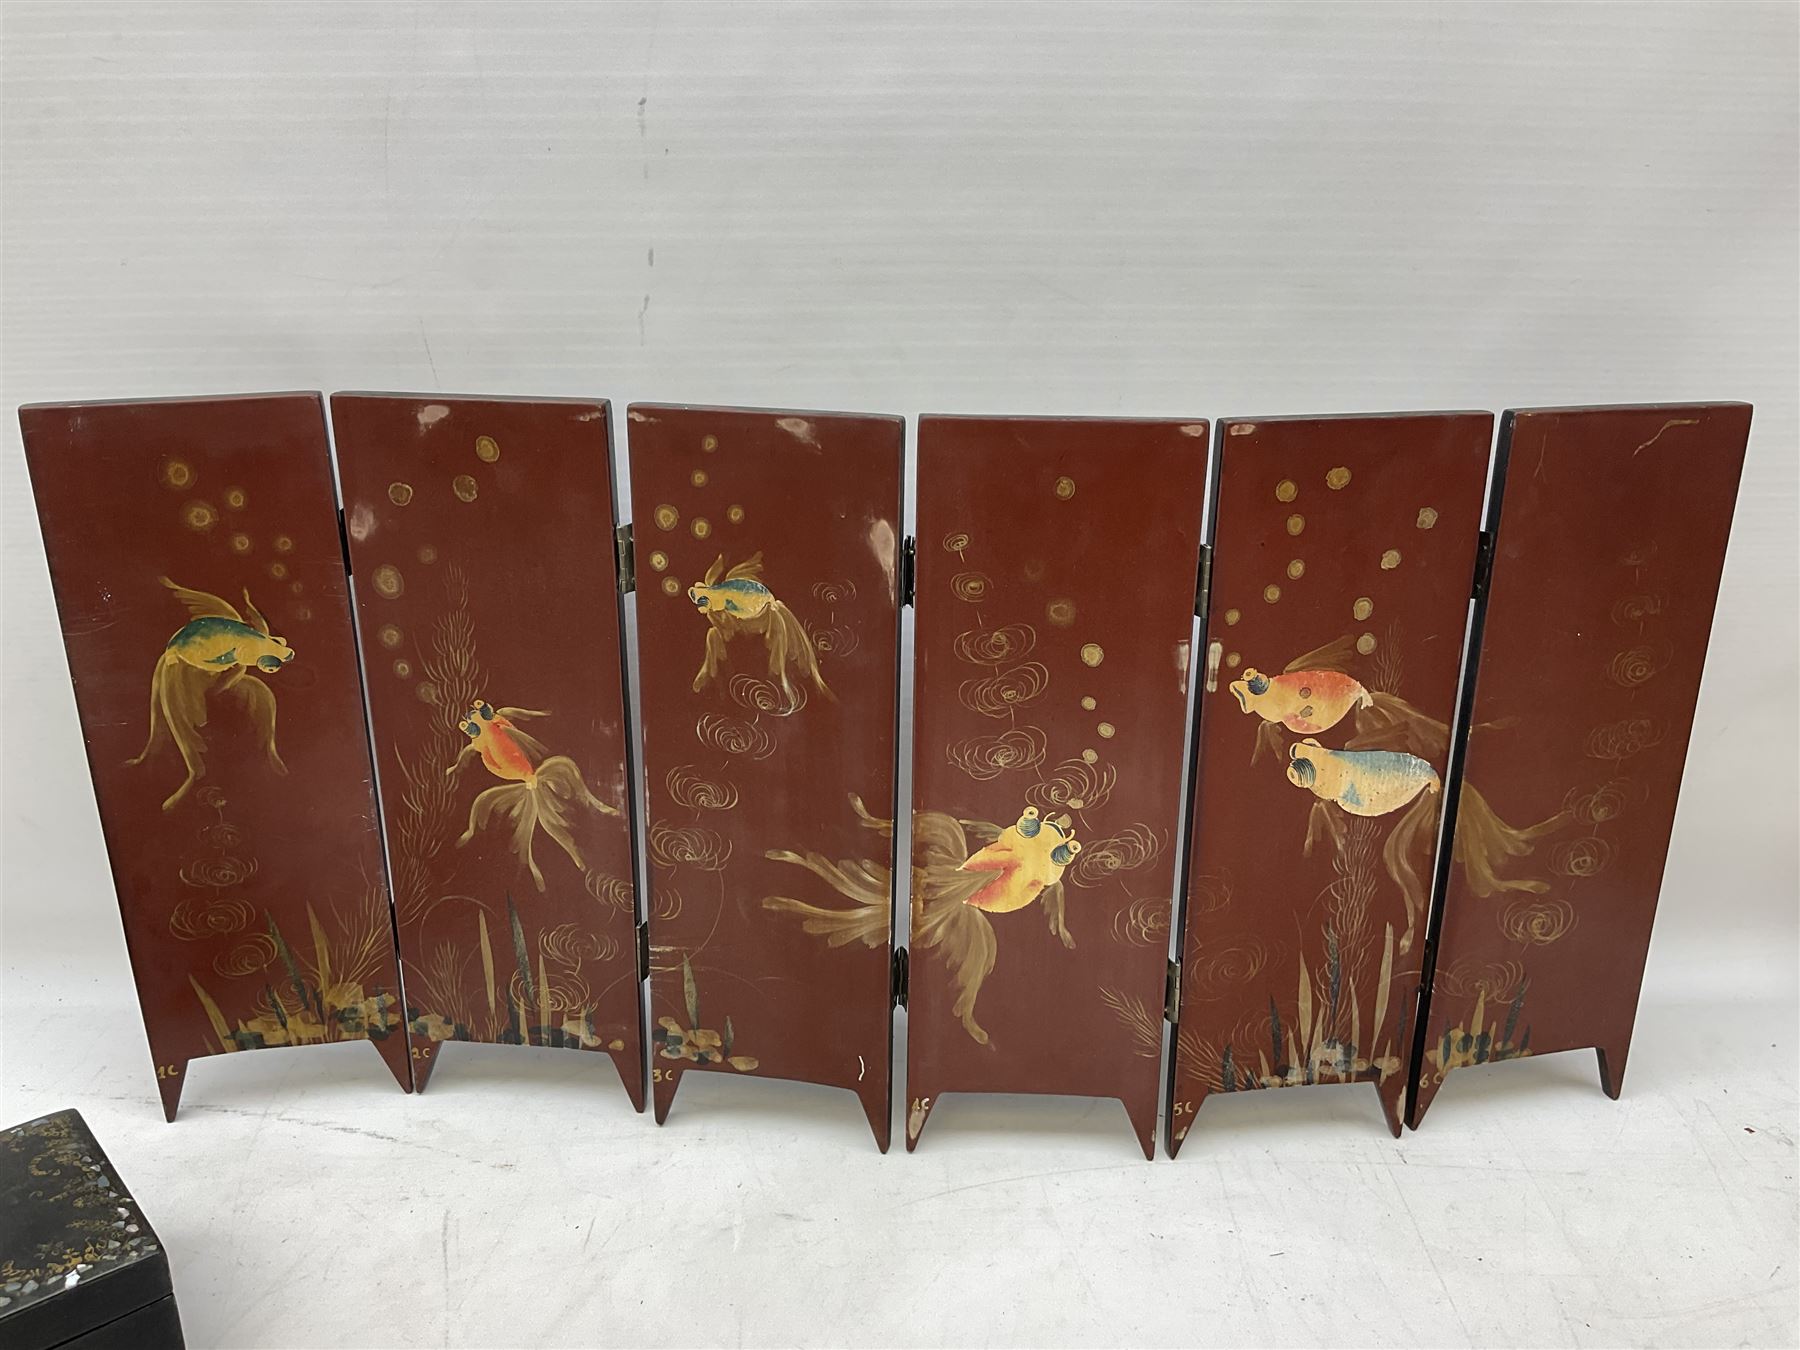 Late 19th / early 20th century Japanese lacquered table top cabinet - Image 12 of 16